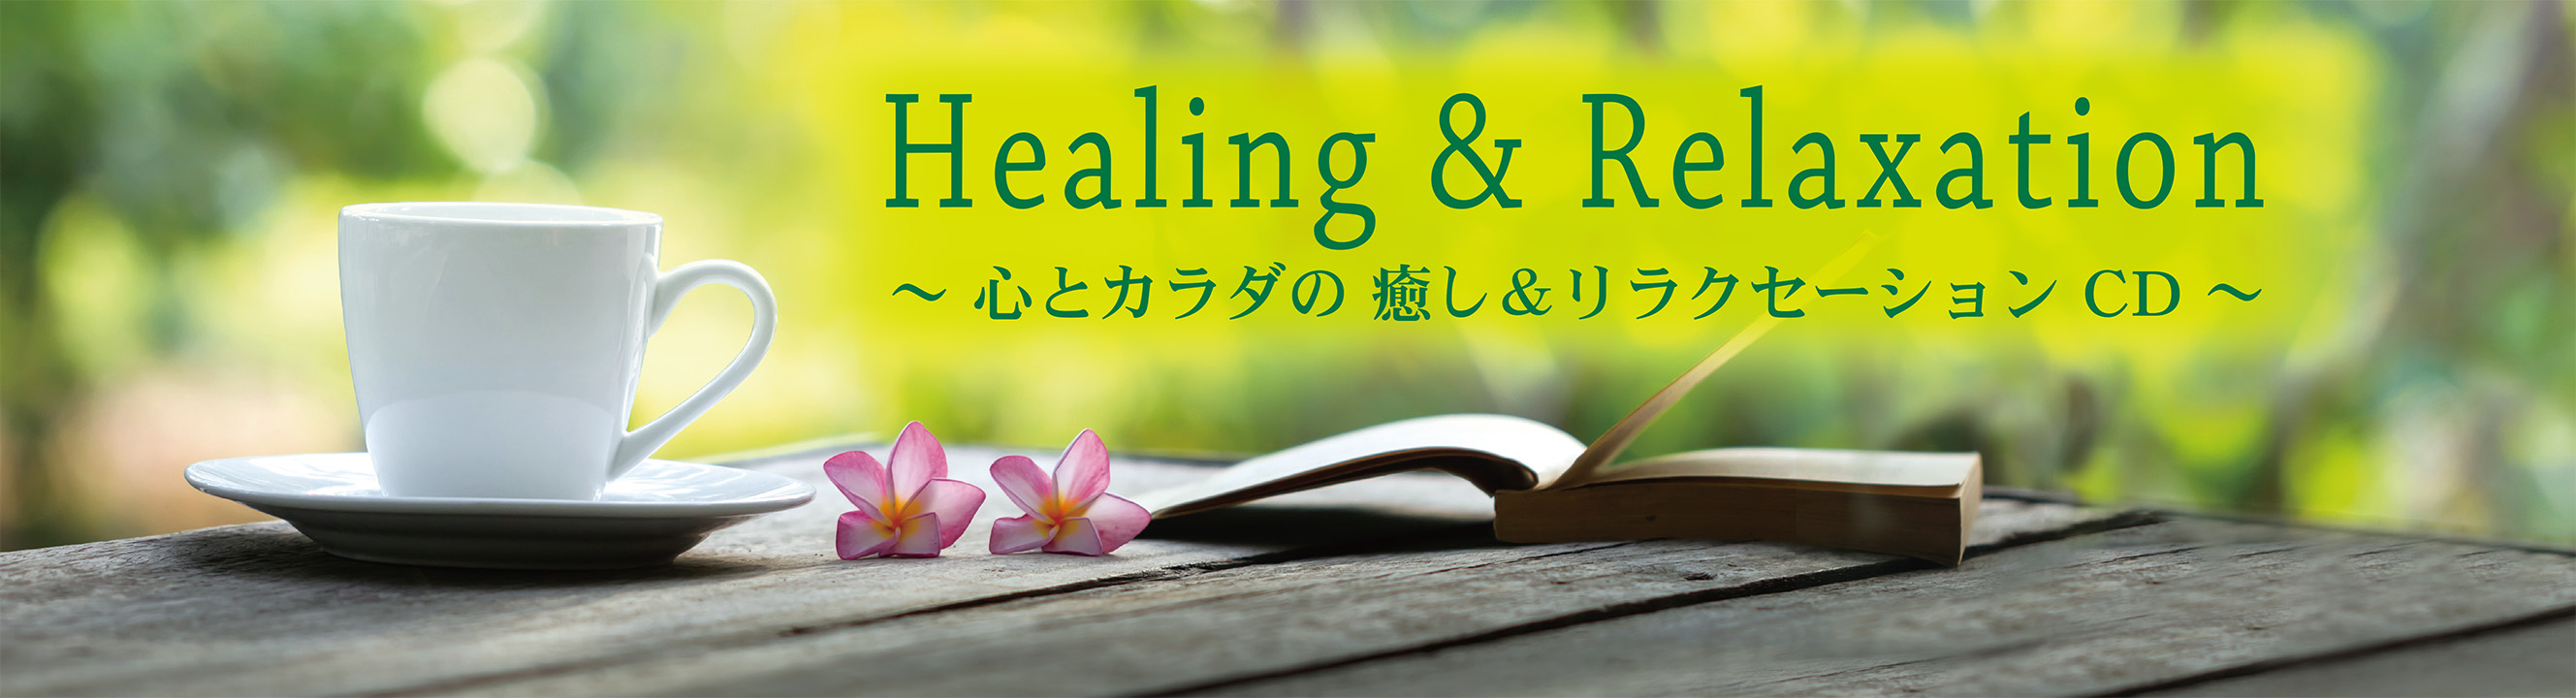 Healing & Relaxation